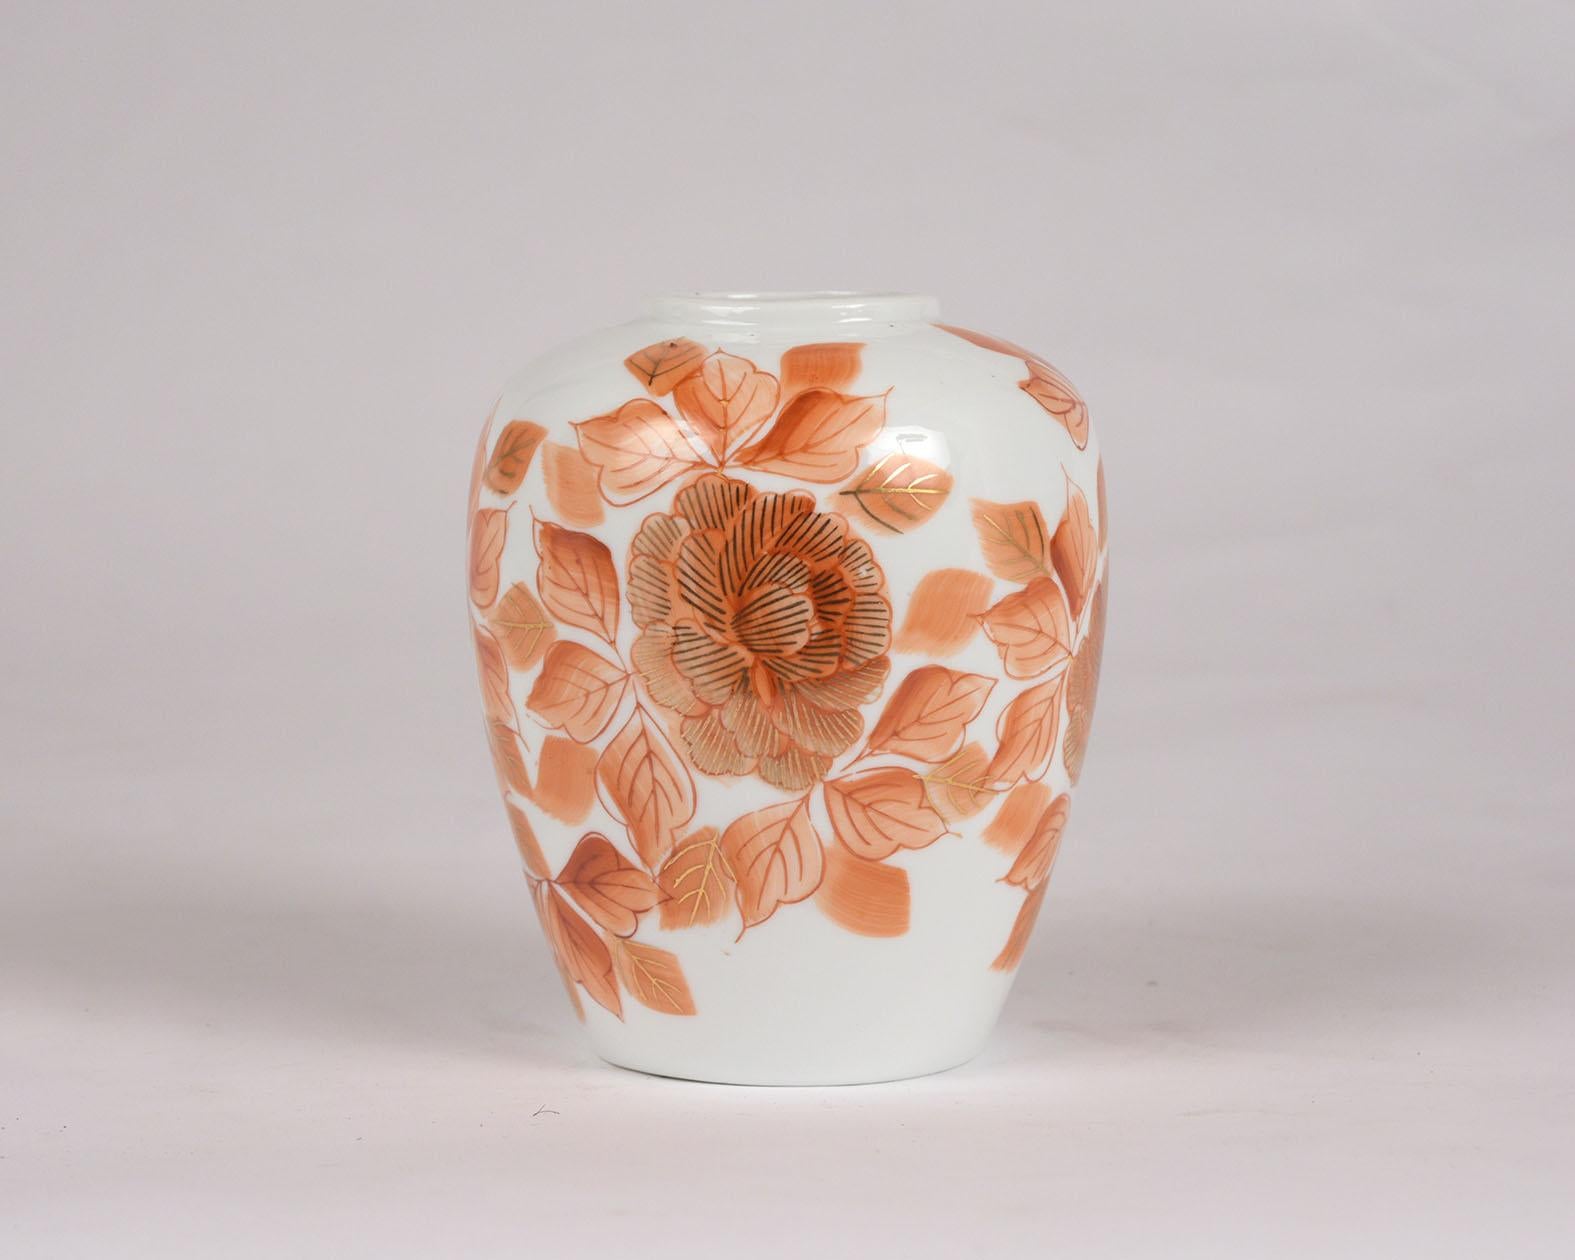 This beautiful 1950s Japanese Porcelain vase is in excellent condition and has its original glaze finish. The white vase has salmon-colored flowers and leaves pattern design with gilt accent details. This vase is in excellent condition and has no